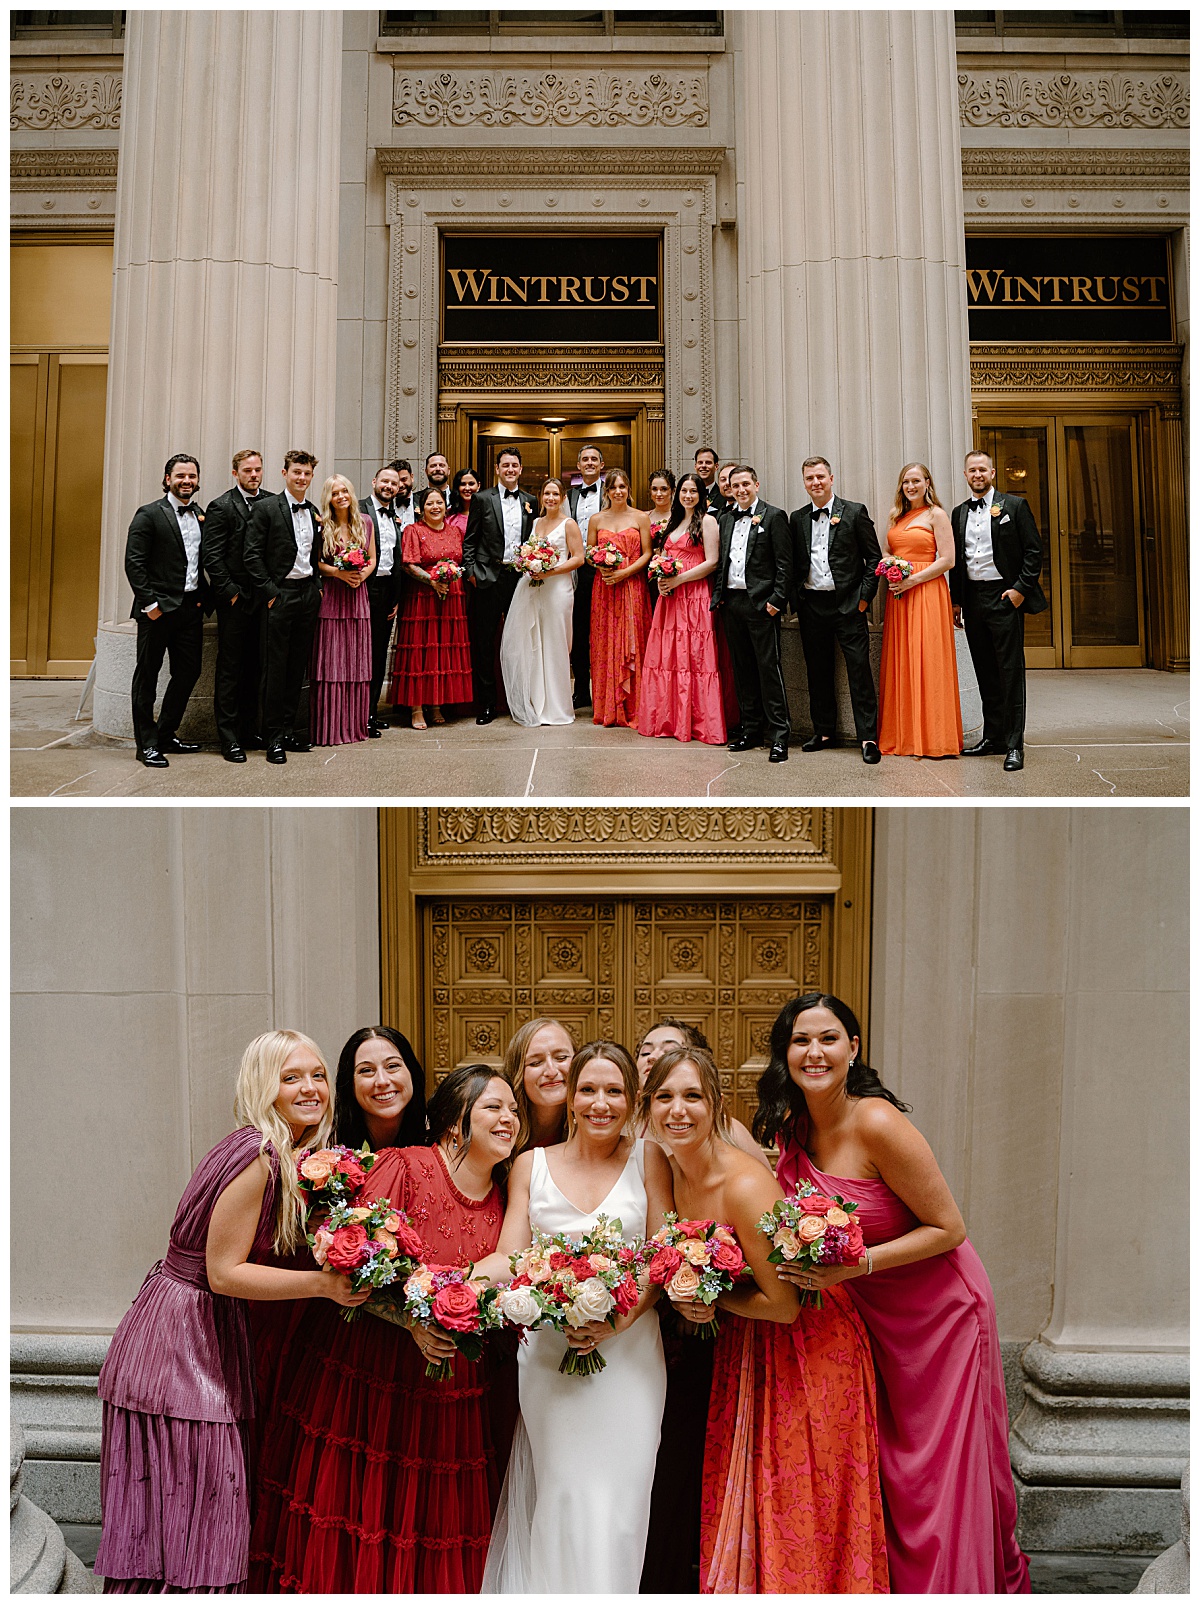 bridal party in colorful gowns and tuxes gather in front of stunning architecture at Chicago Winery